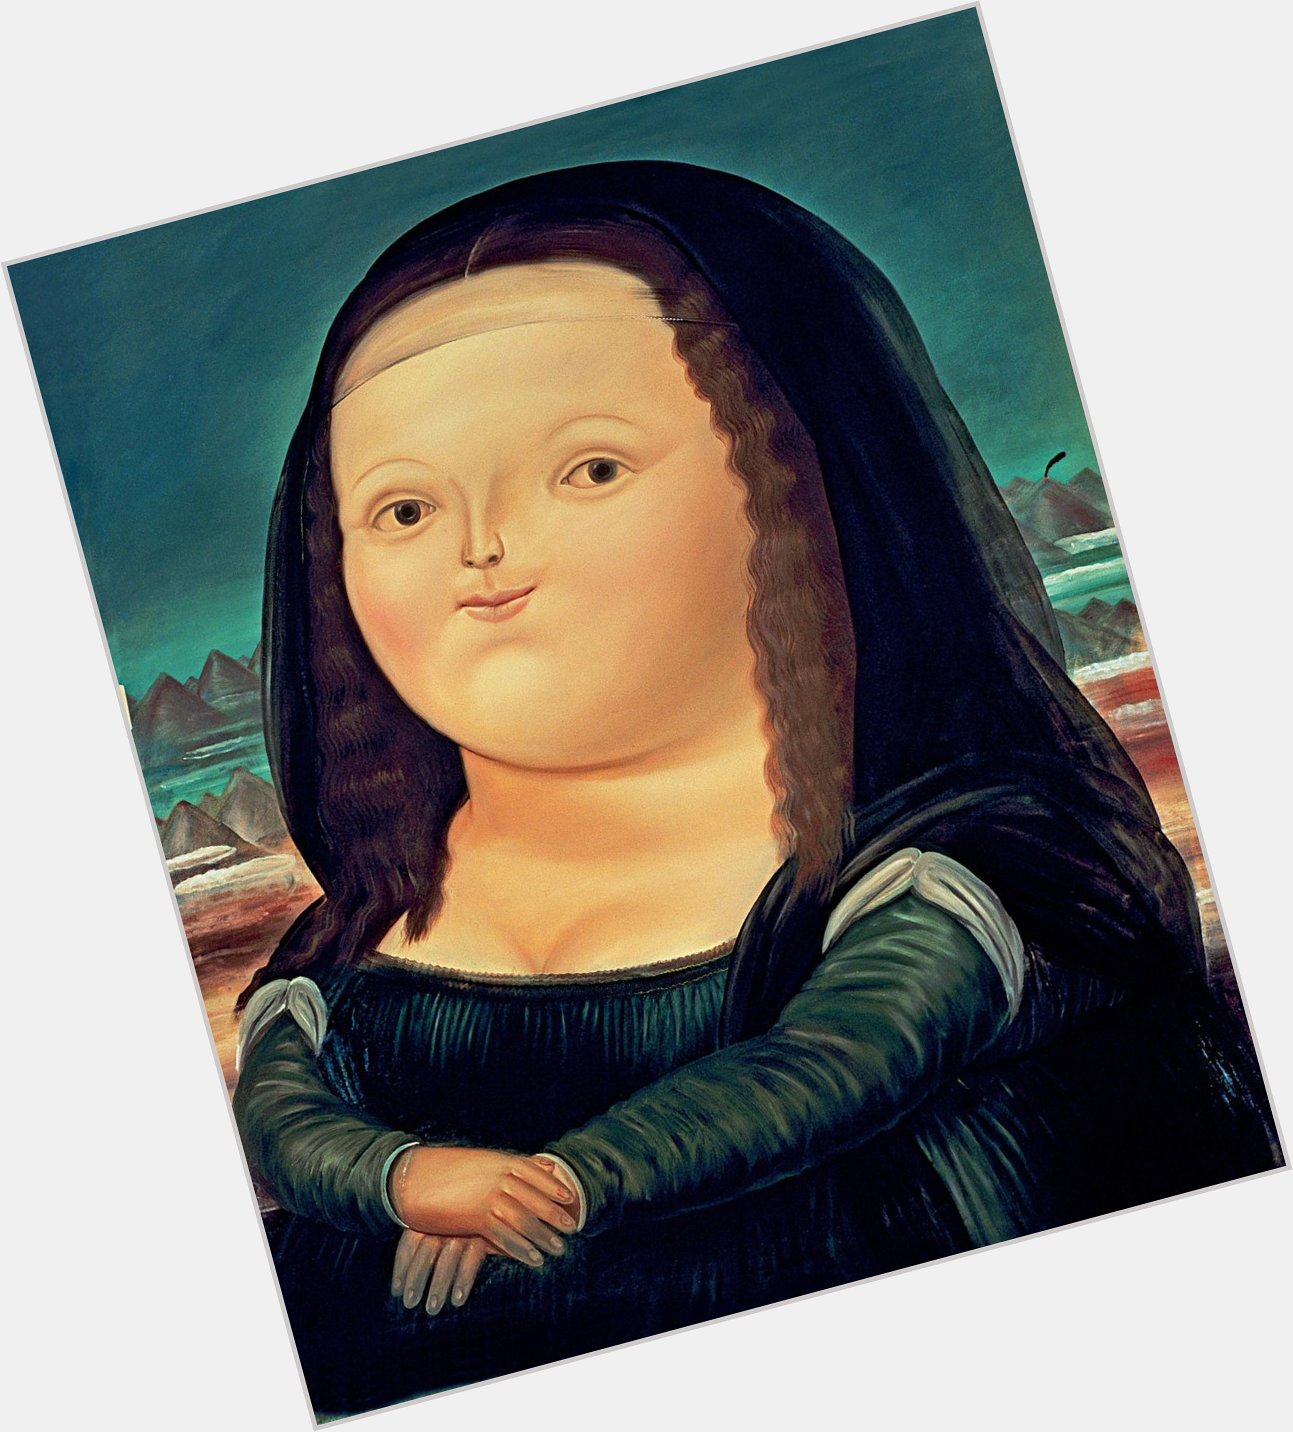 Happy 90th birthday to fernando botero, who will never cease to inspire me 